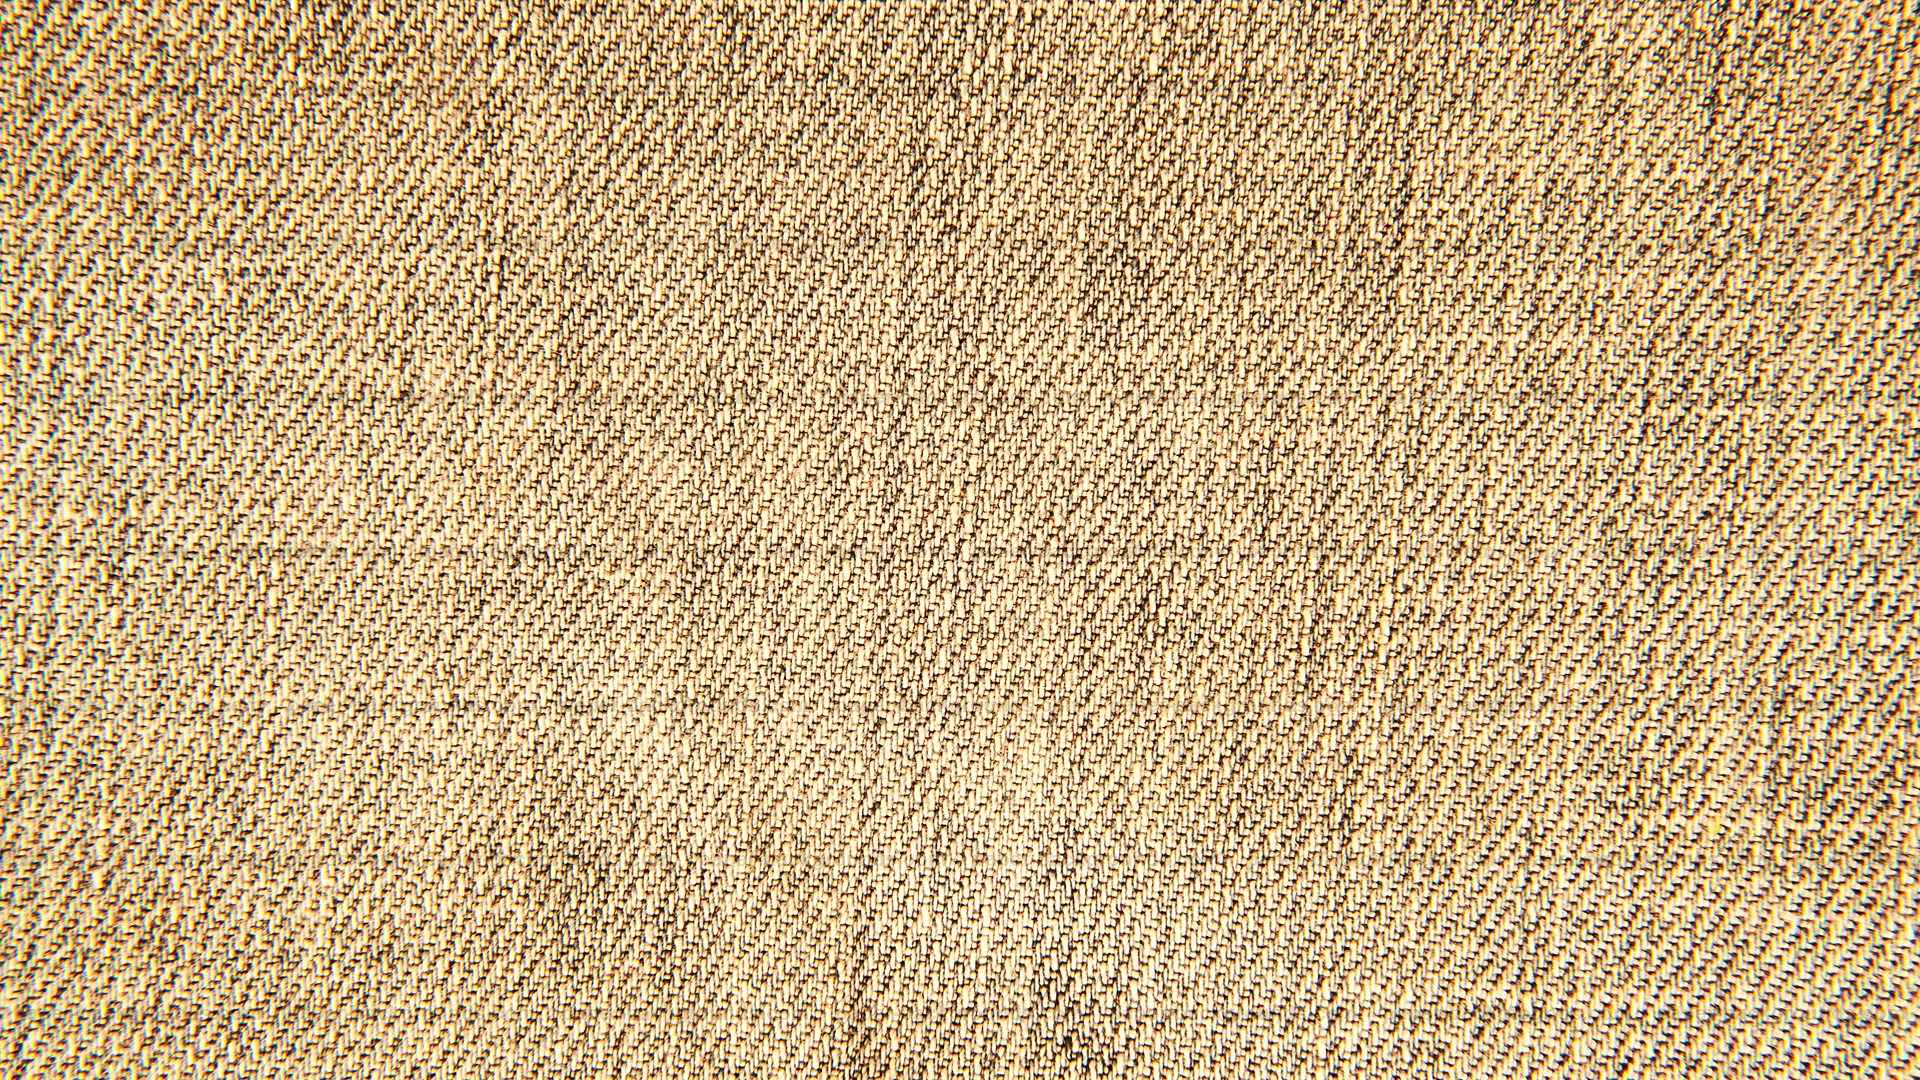 Material Fabric Background Texture Wallpaper